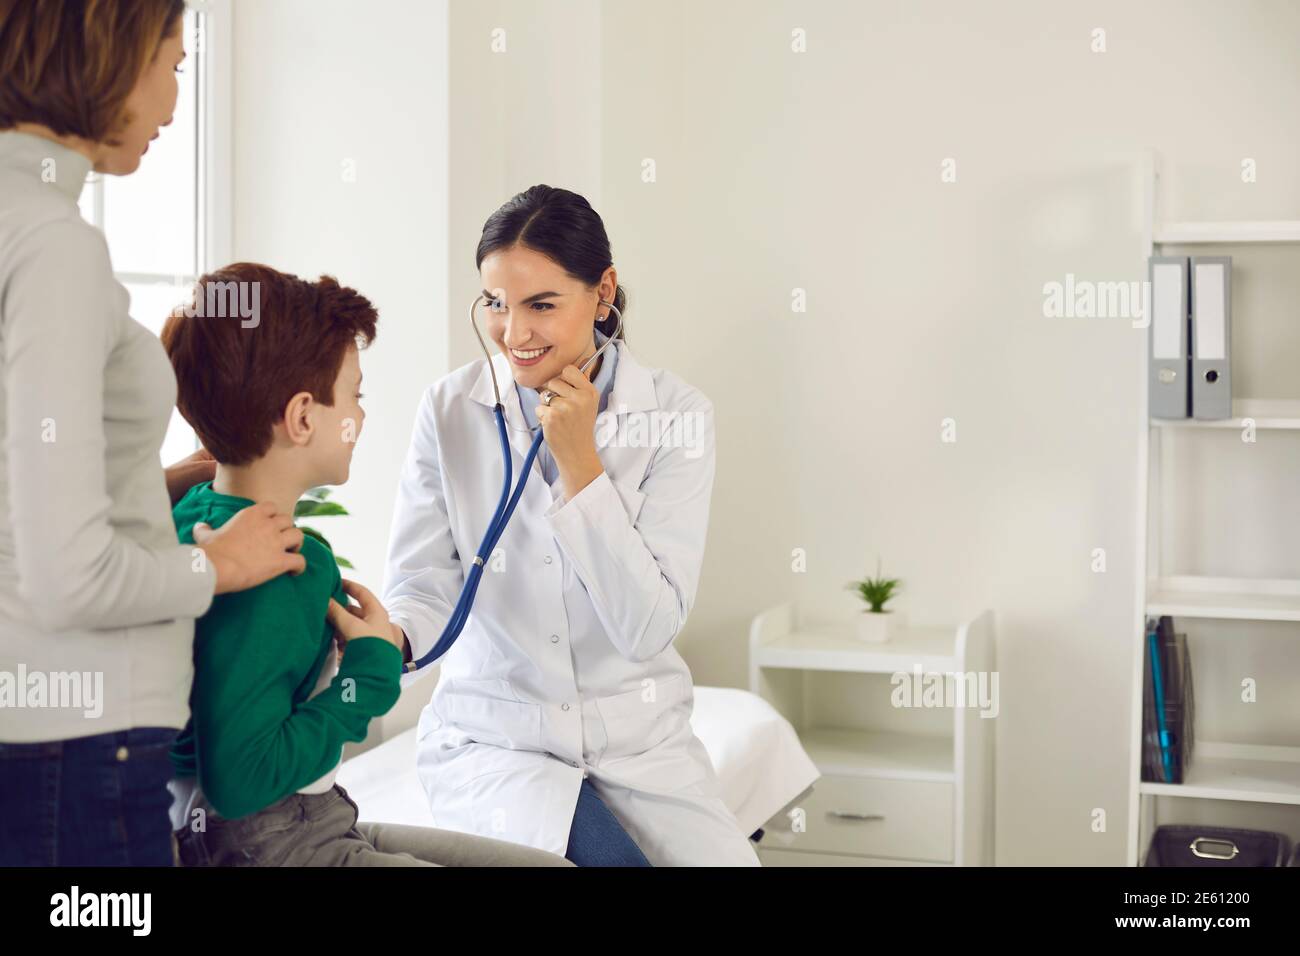 Female pediatrician makes a medical examination and attaches a stethoscope to the baby's chest. Stock Photo